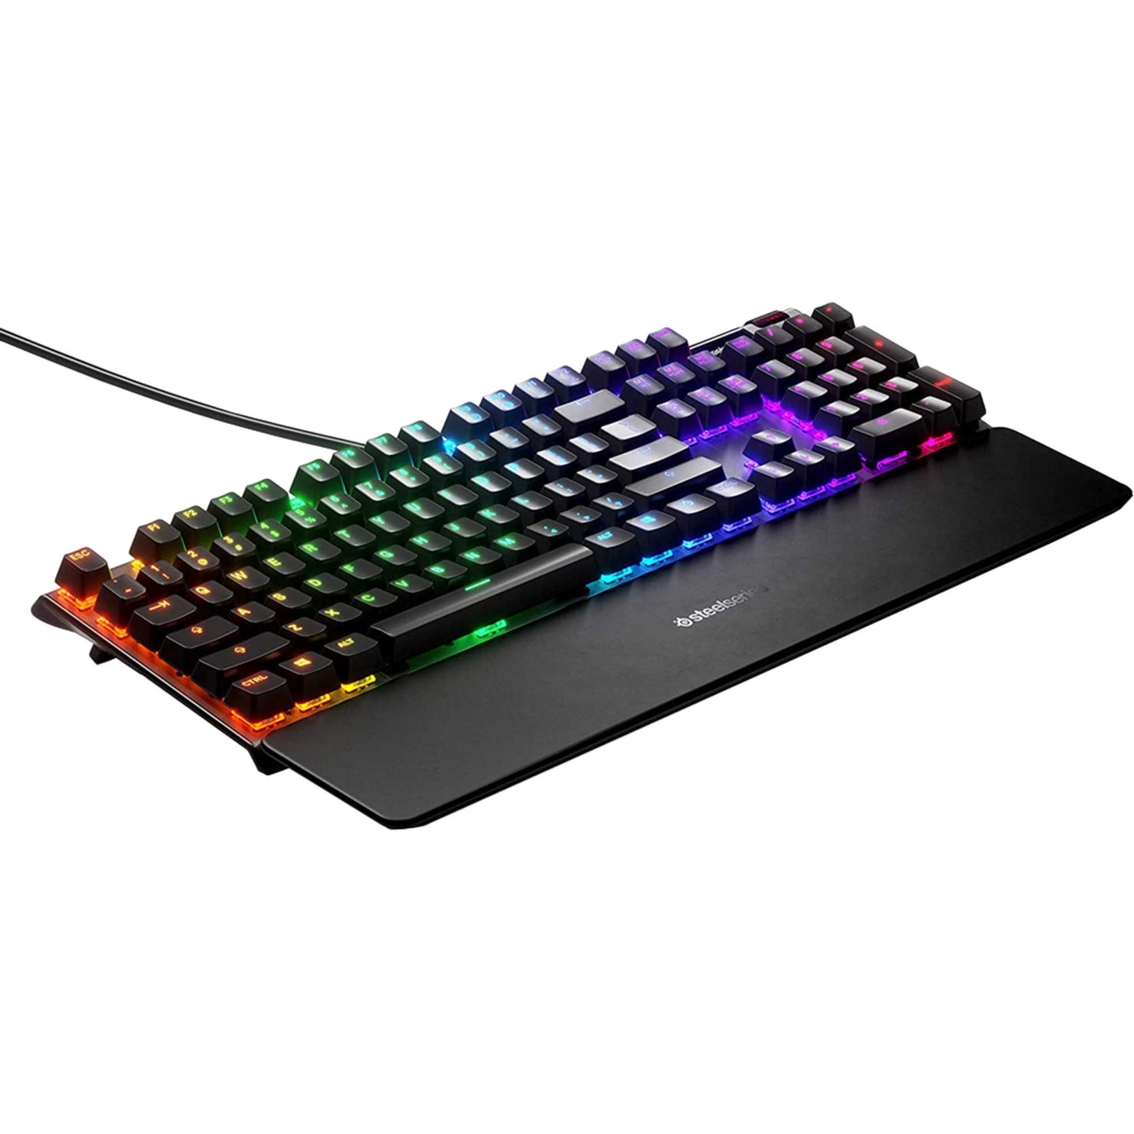 SteelSeries Apex 7 TKL Wired Gaming Mechanical Blue Switch Keyboard - Image 2 of 3